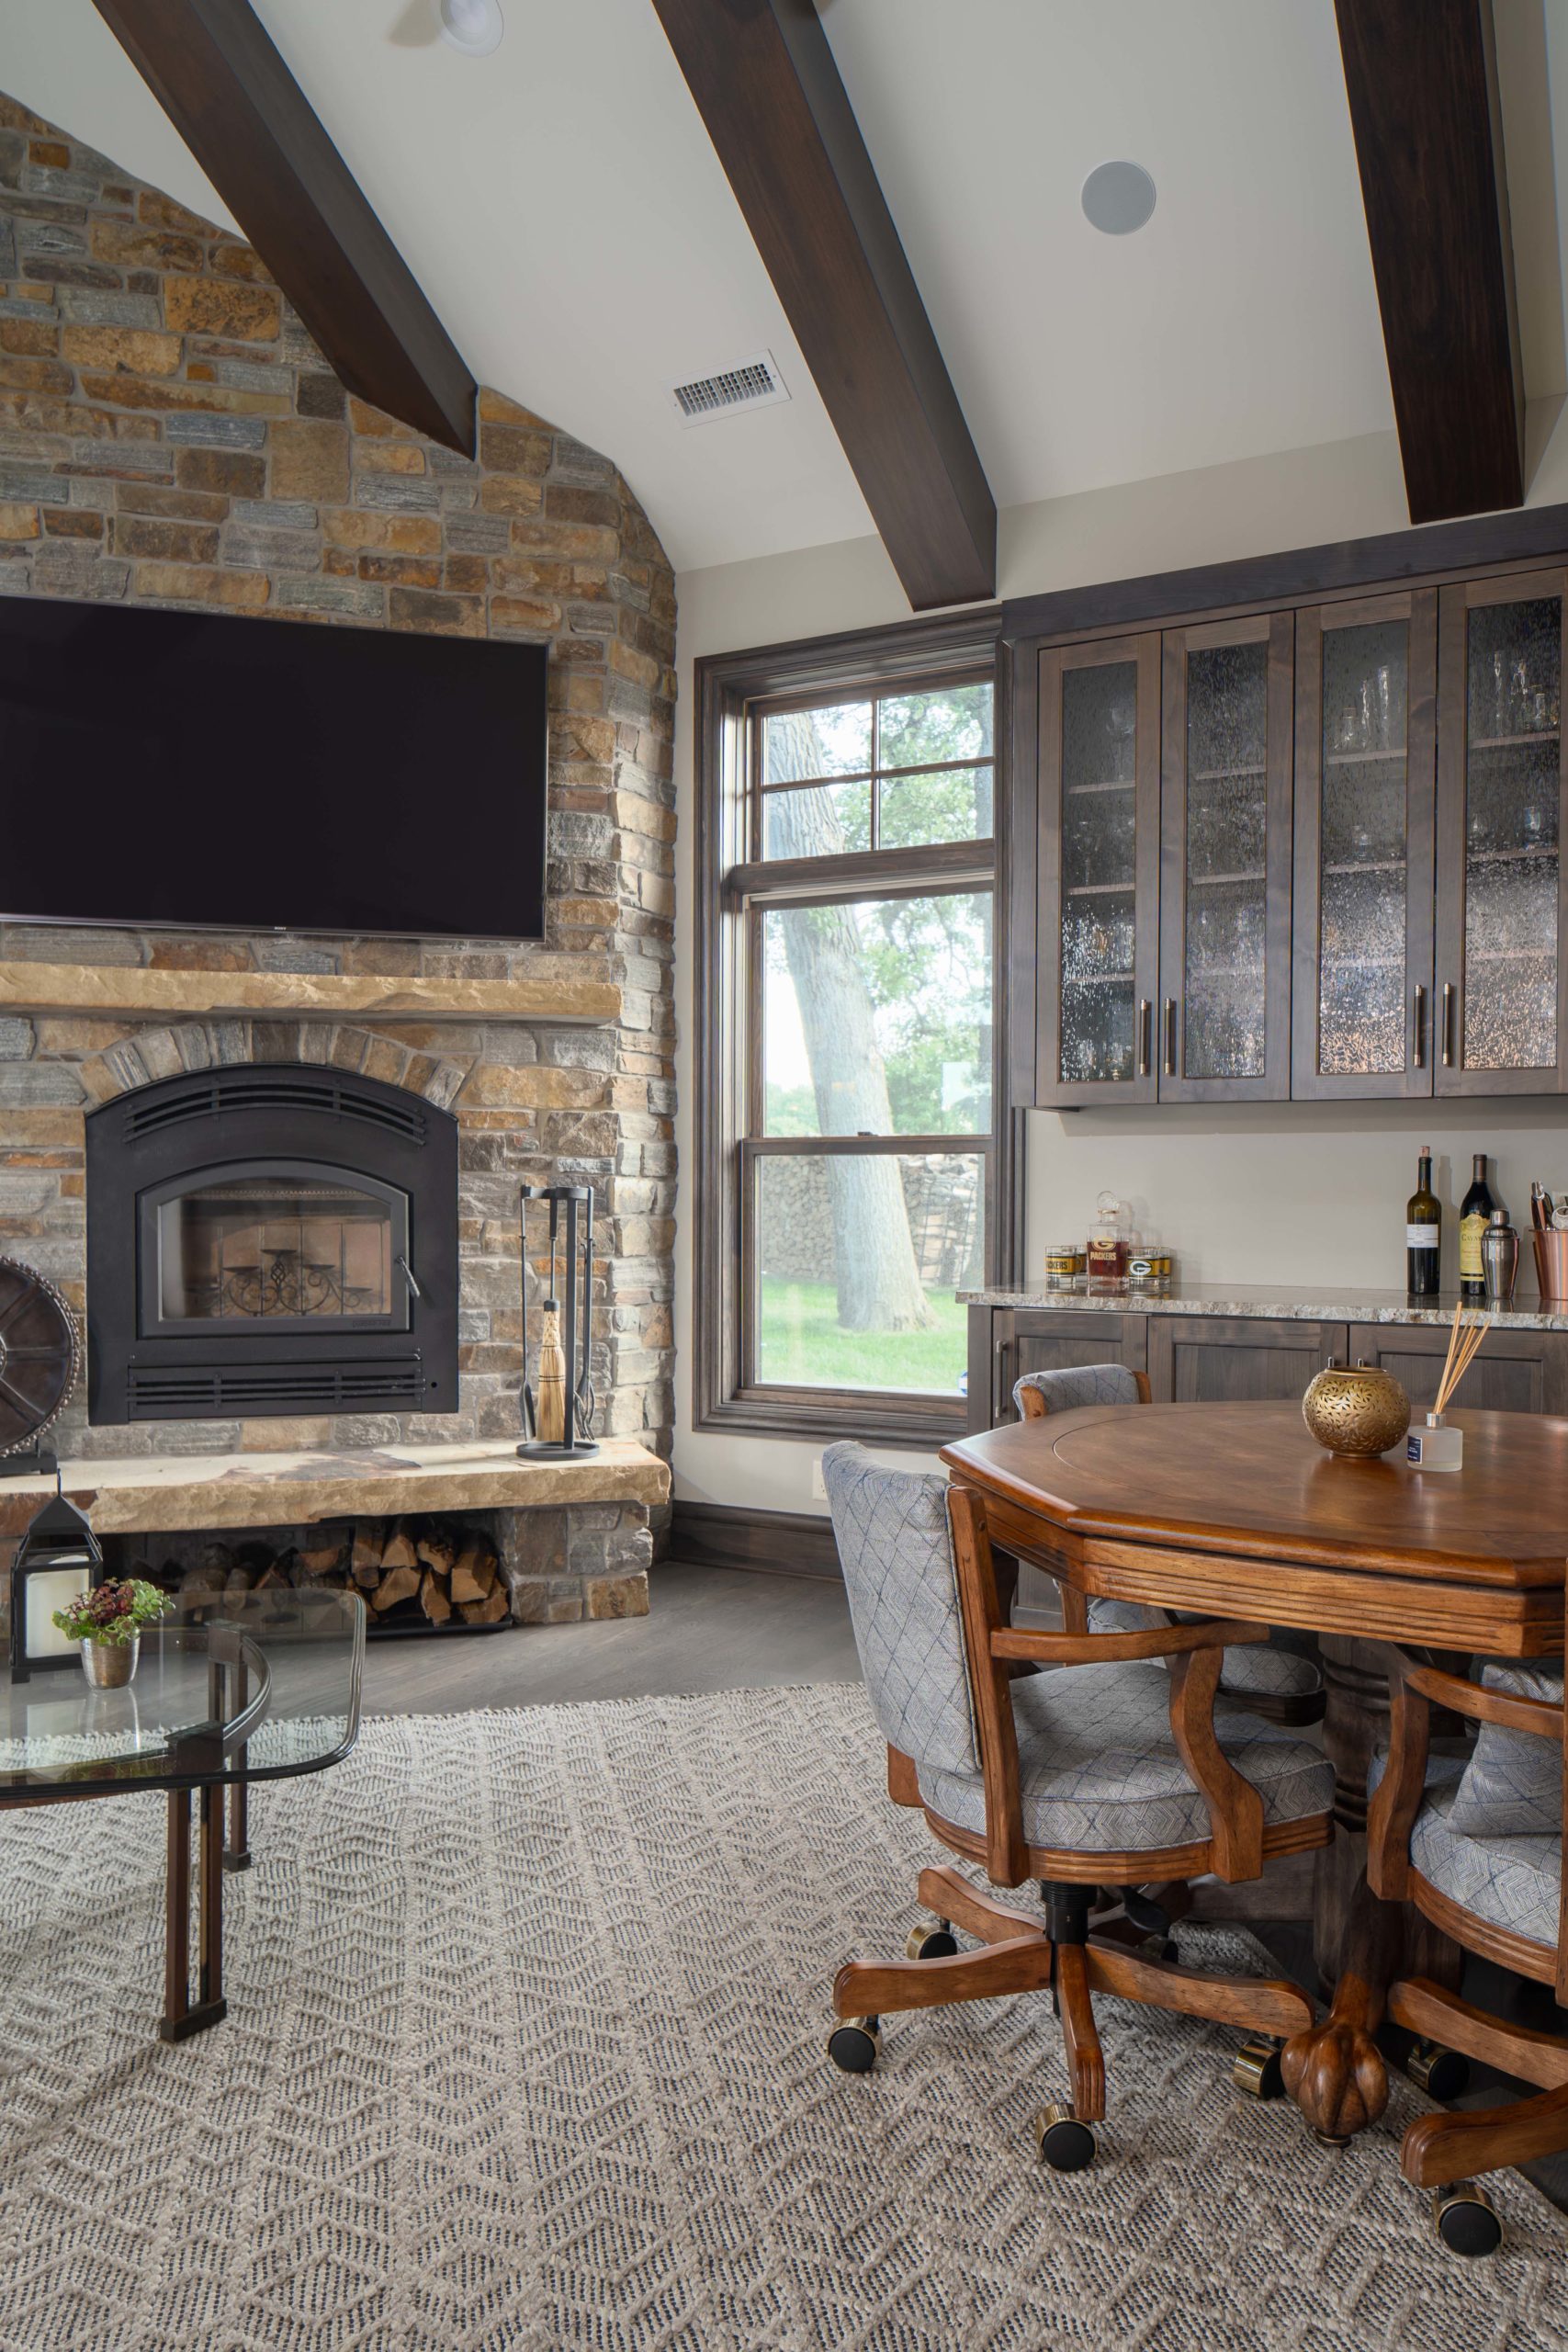 The Lake Escape custom home remodel featuring a stone fireplace in the living room.